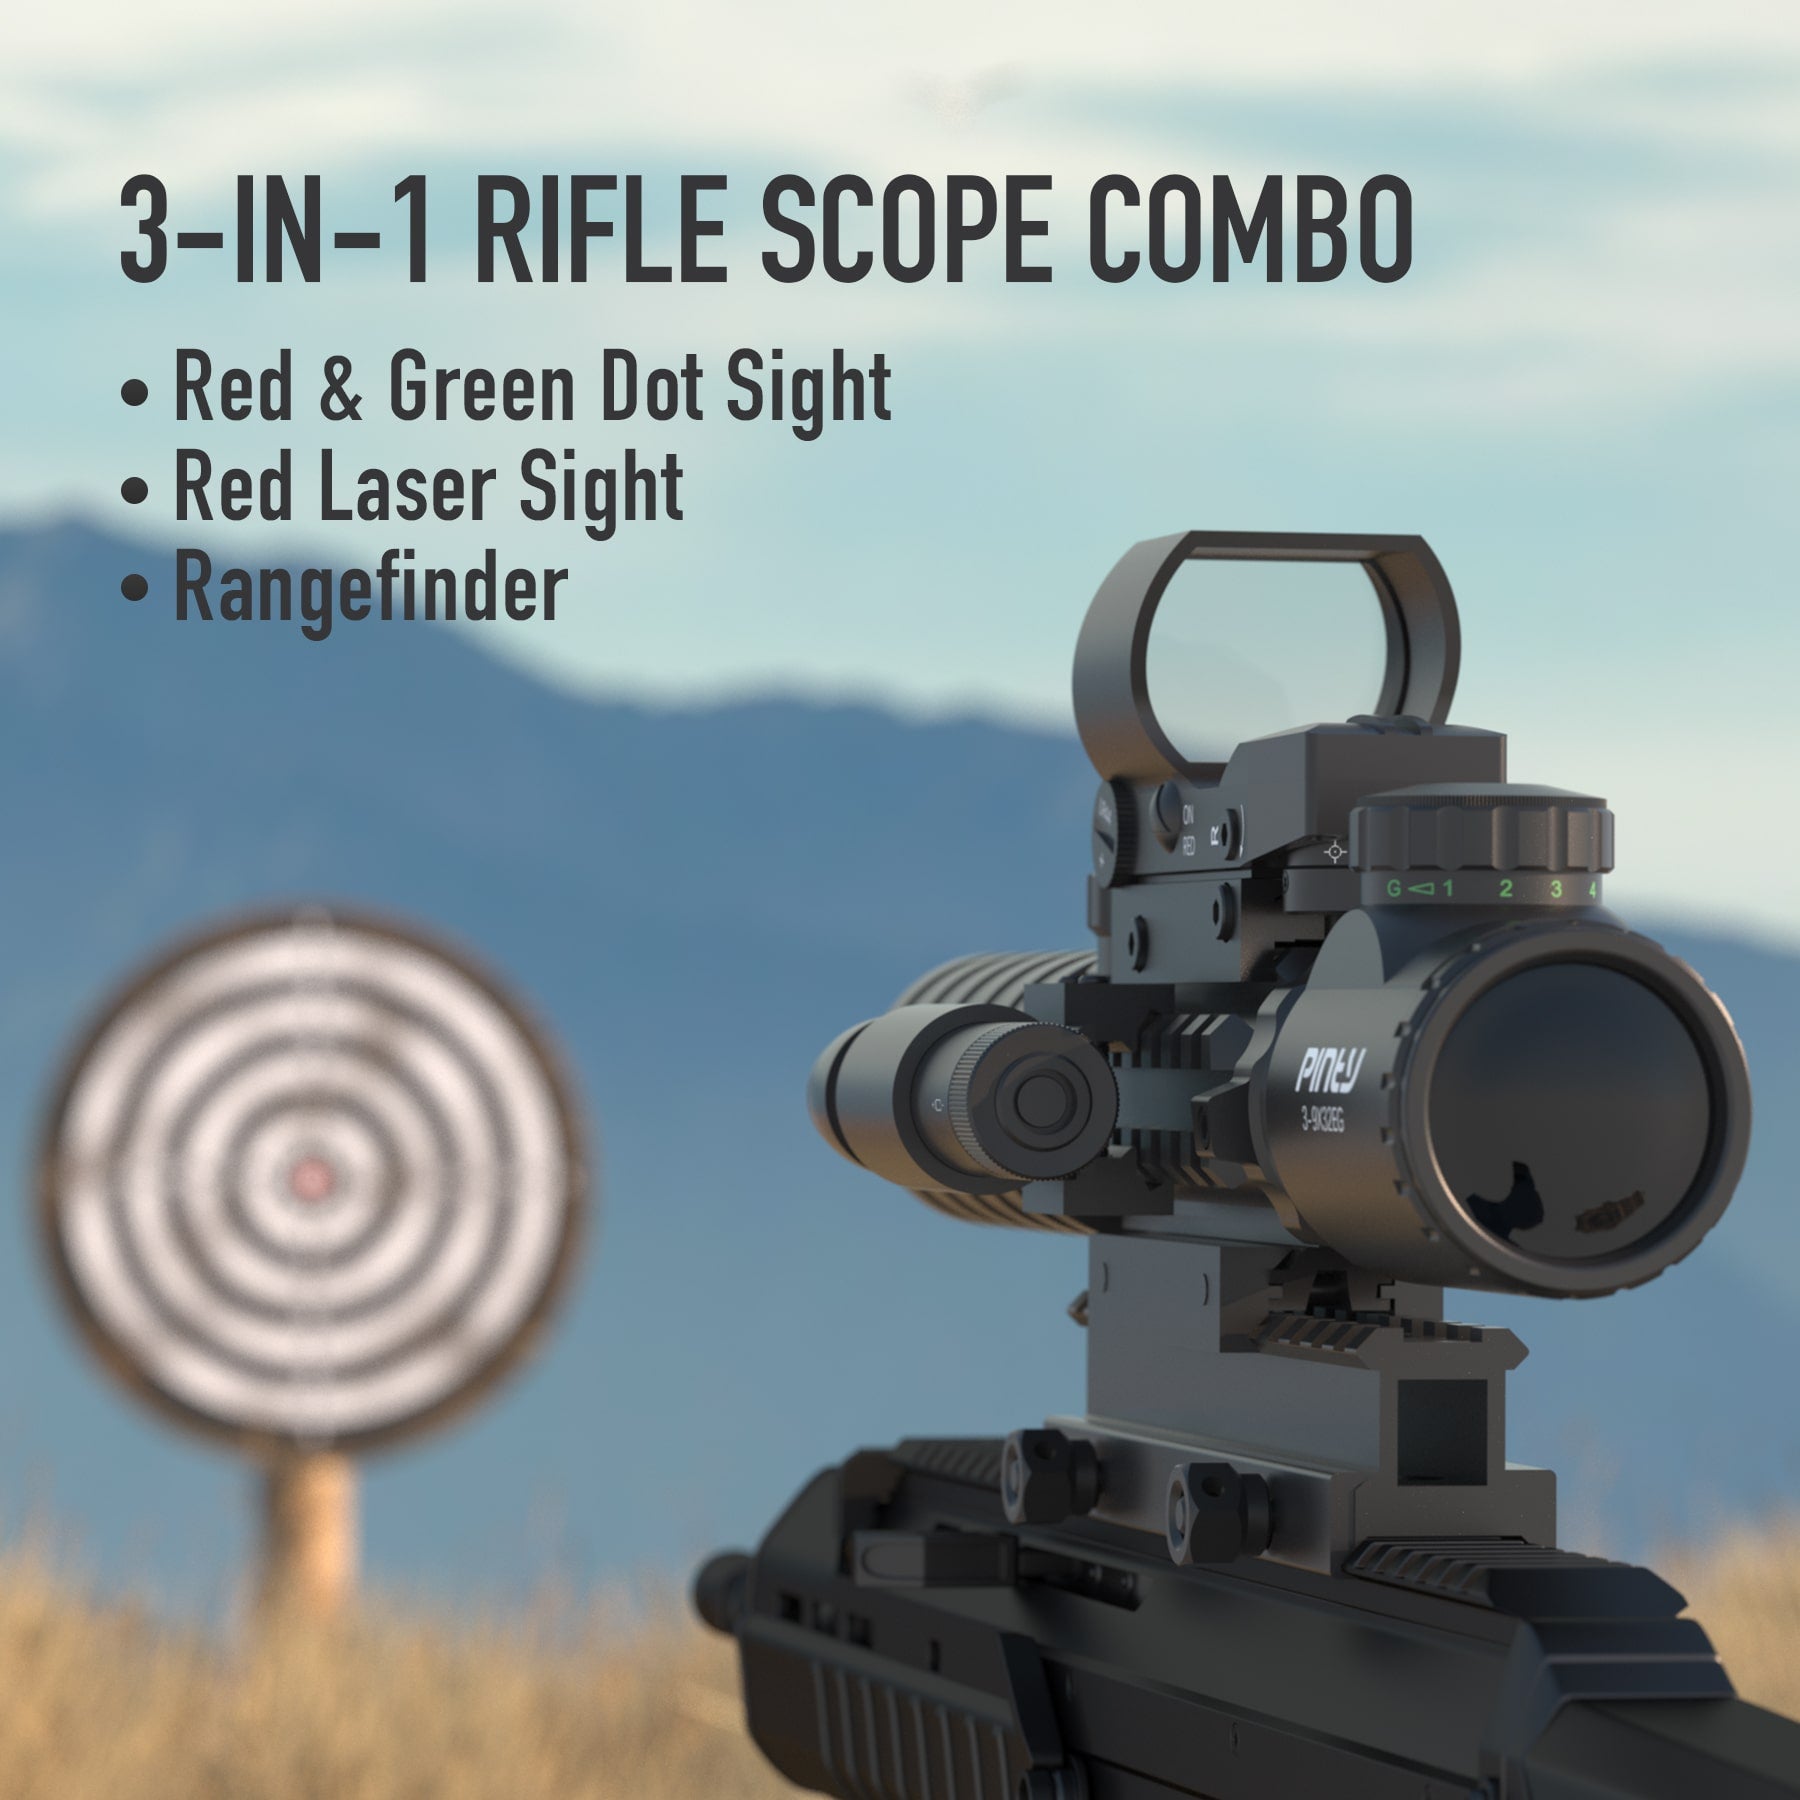    Pinty-Rifle-Scope-3-9x32-Rangefinder-Illuminated-Reflex-Sight-4-Reticle-Red-Dot-Laser-Sight-with-14-Slots-1-inch-High-Riser-Mount-sig-scopes-tactical-scope